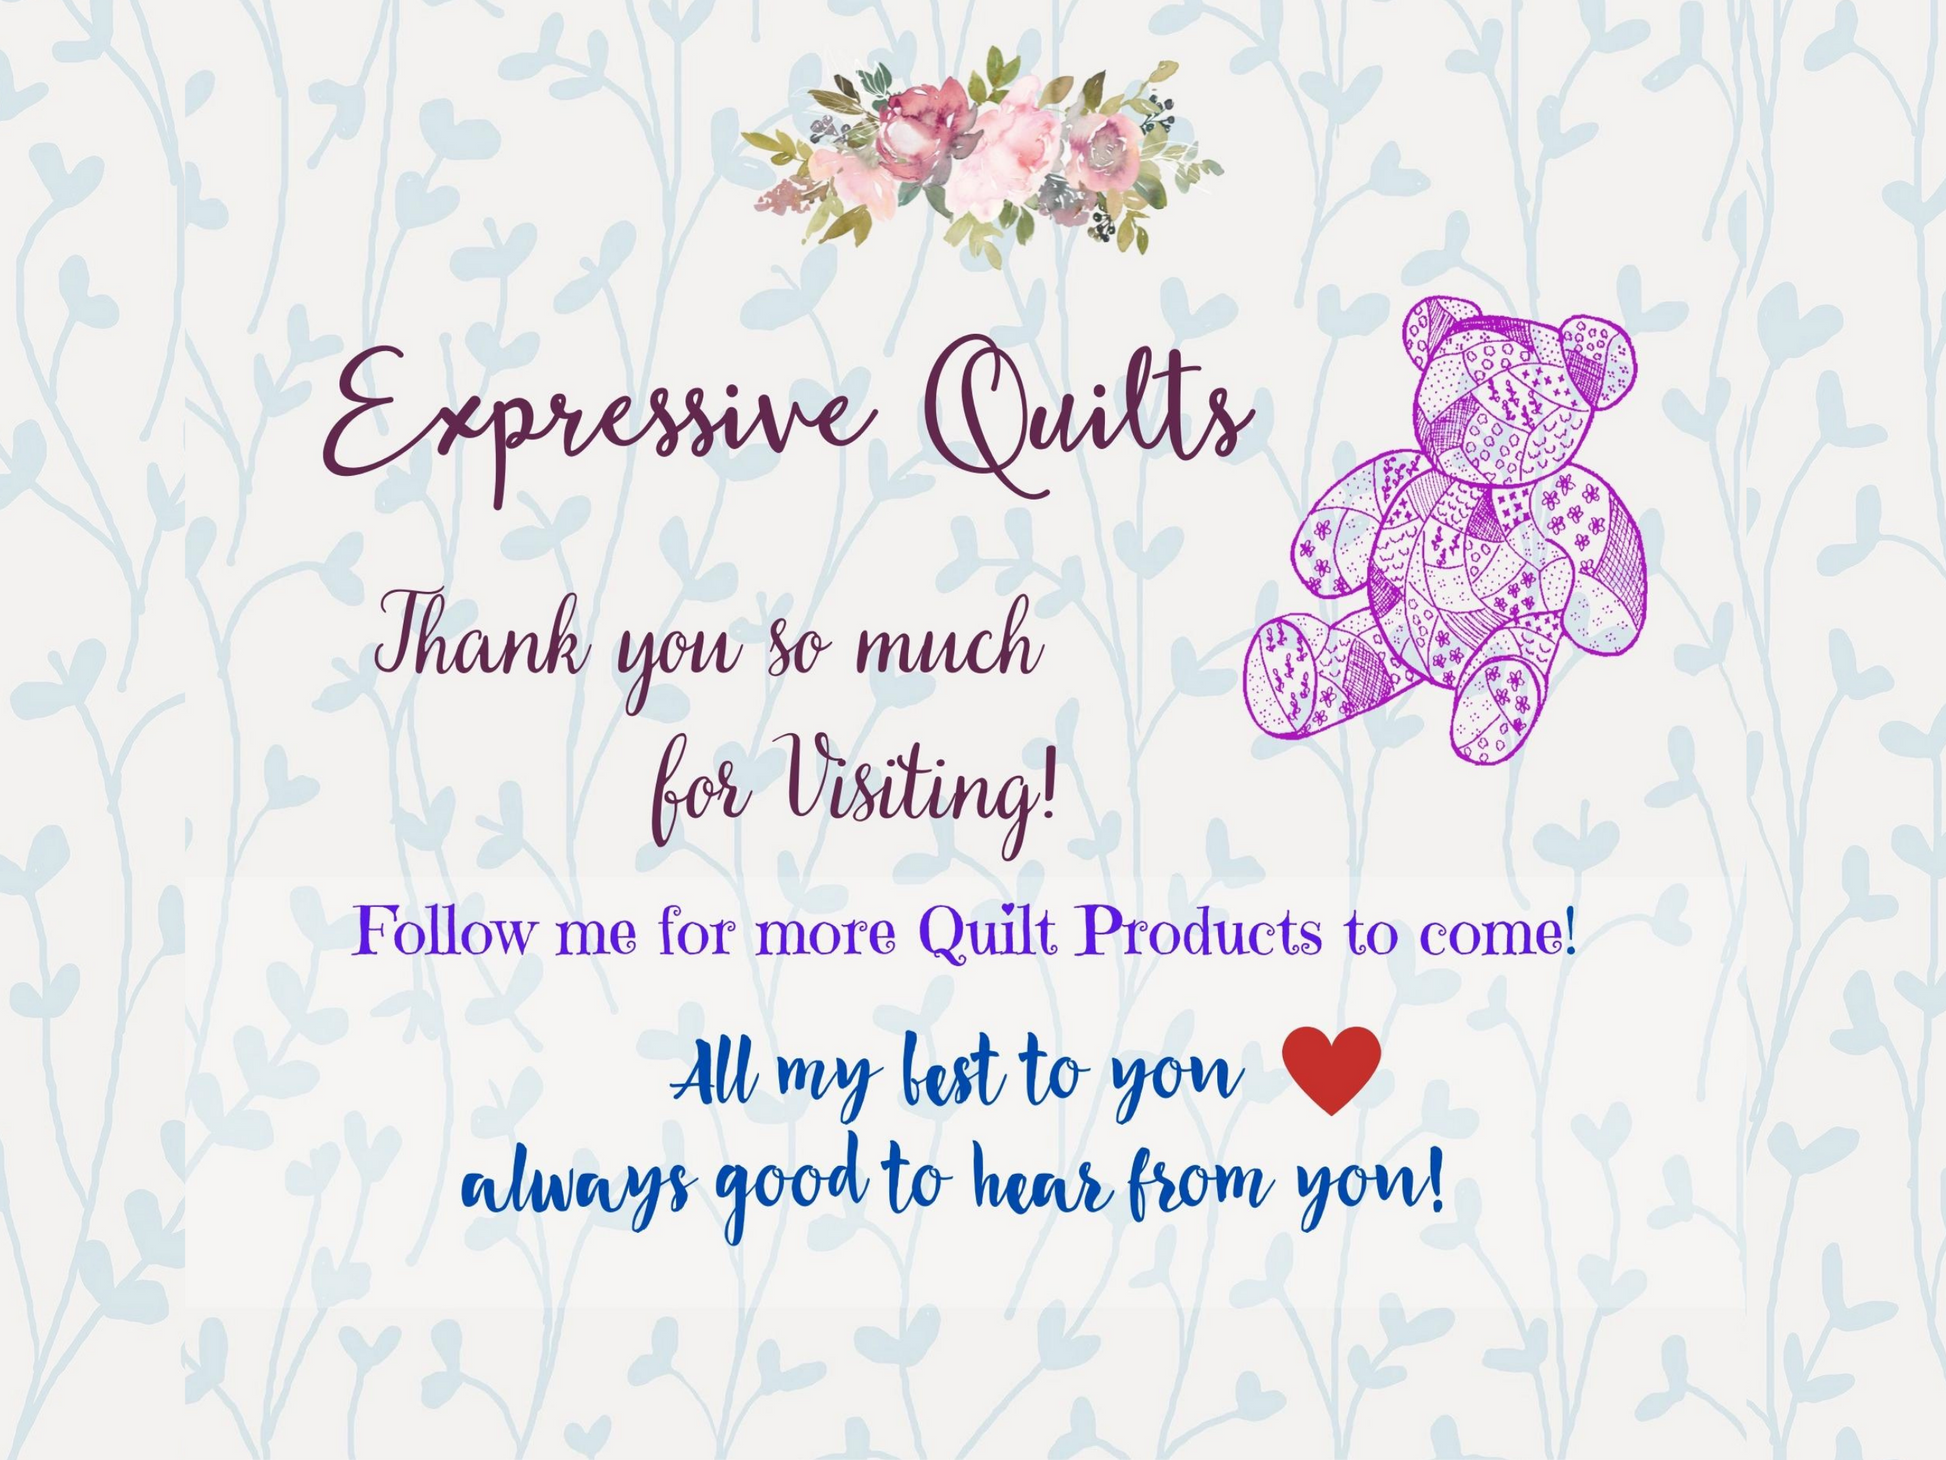 follow me on expressivequilts.com